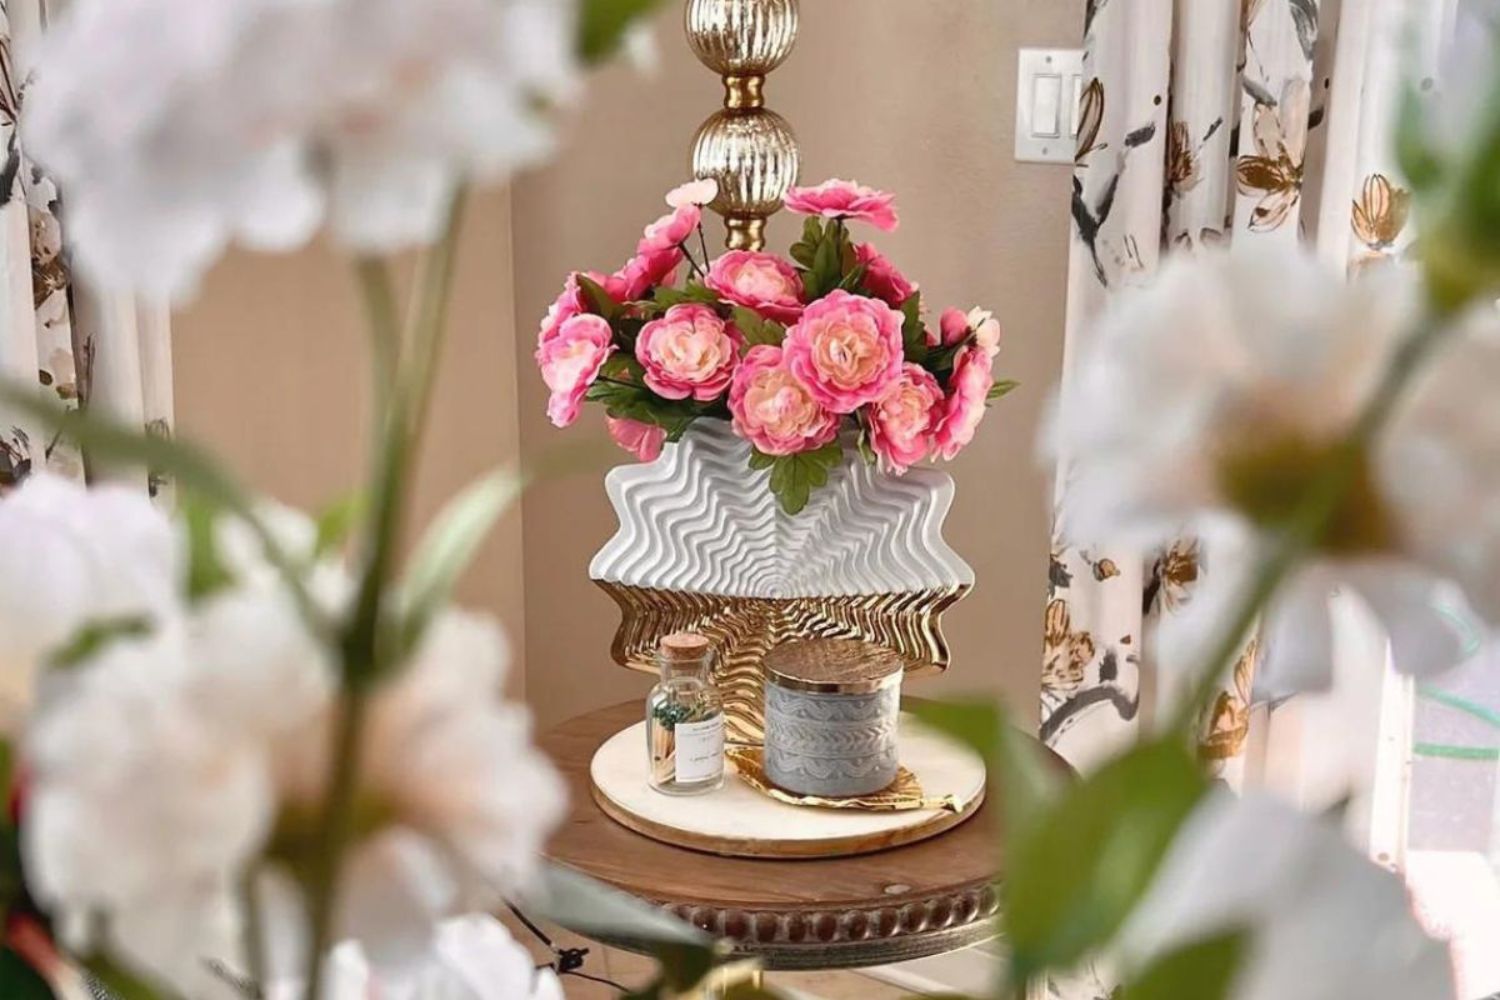 KYA Home Decor Footer Image Of Luxury Vases with Stunning Flowers.